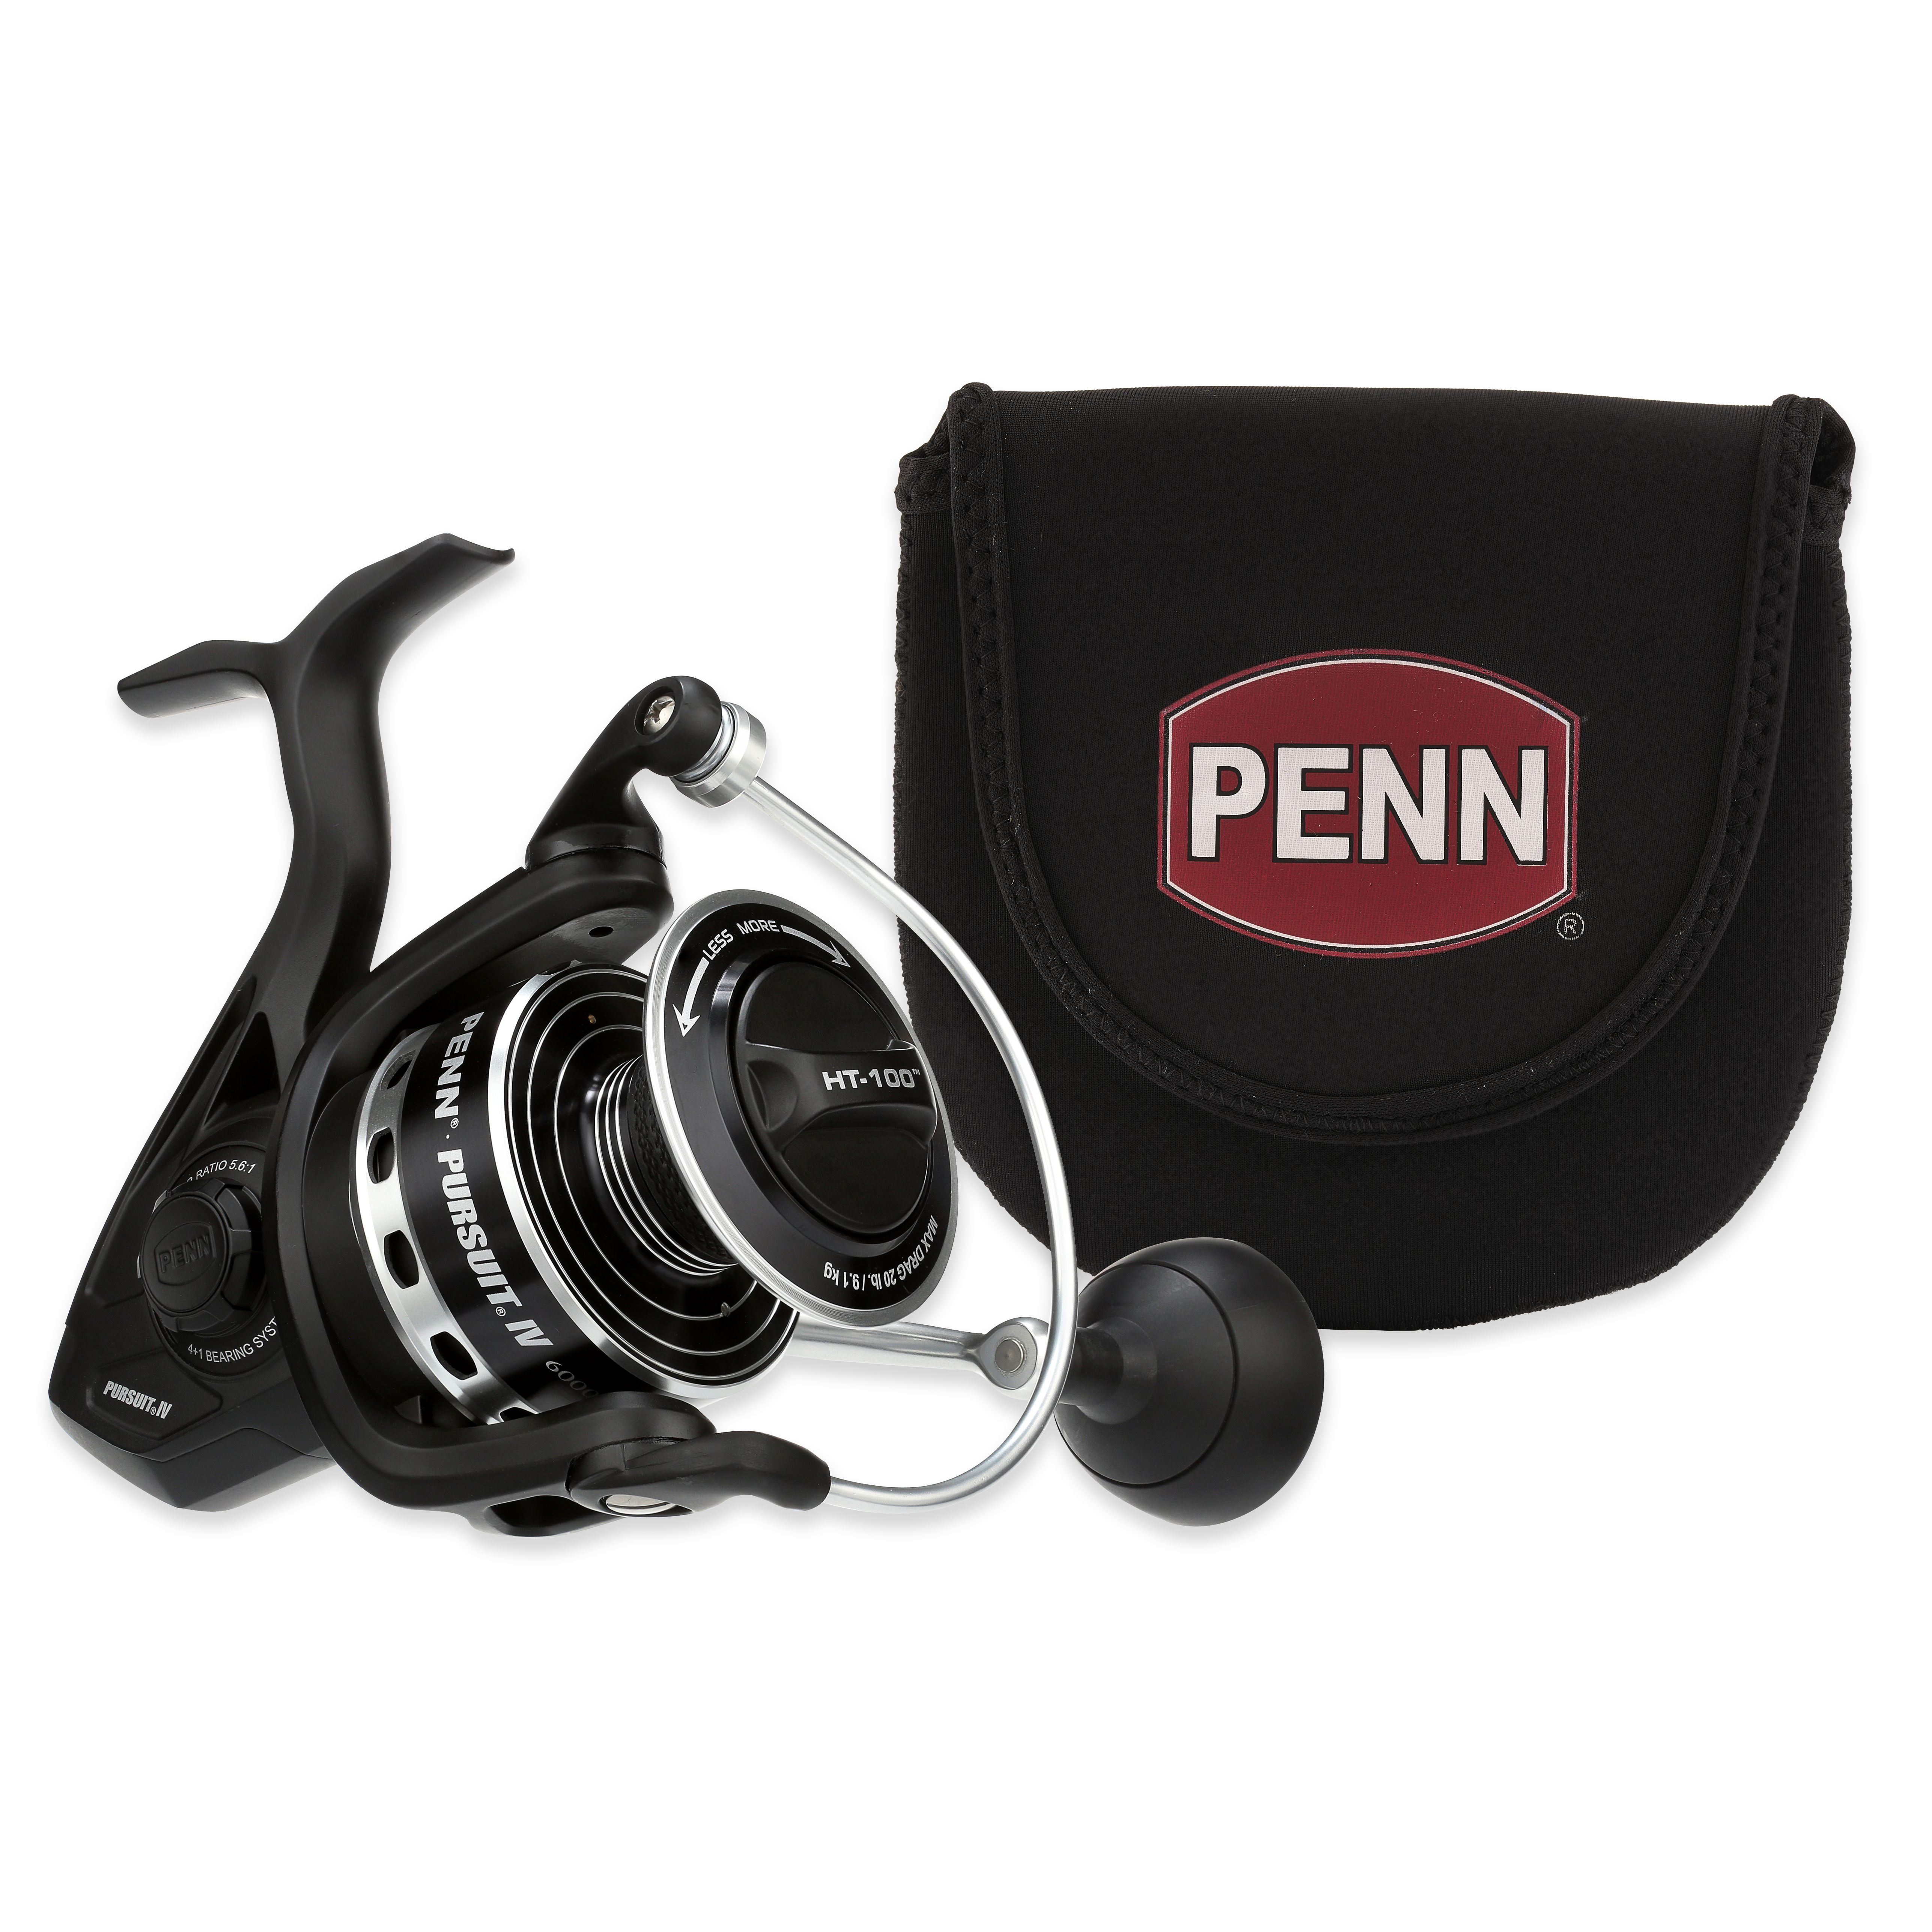 PENN Pursuit IV Spinning Reel Kit, Size 4000, Includes Reel Cover 